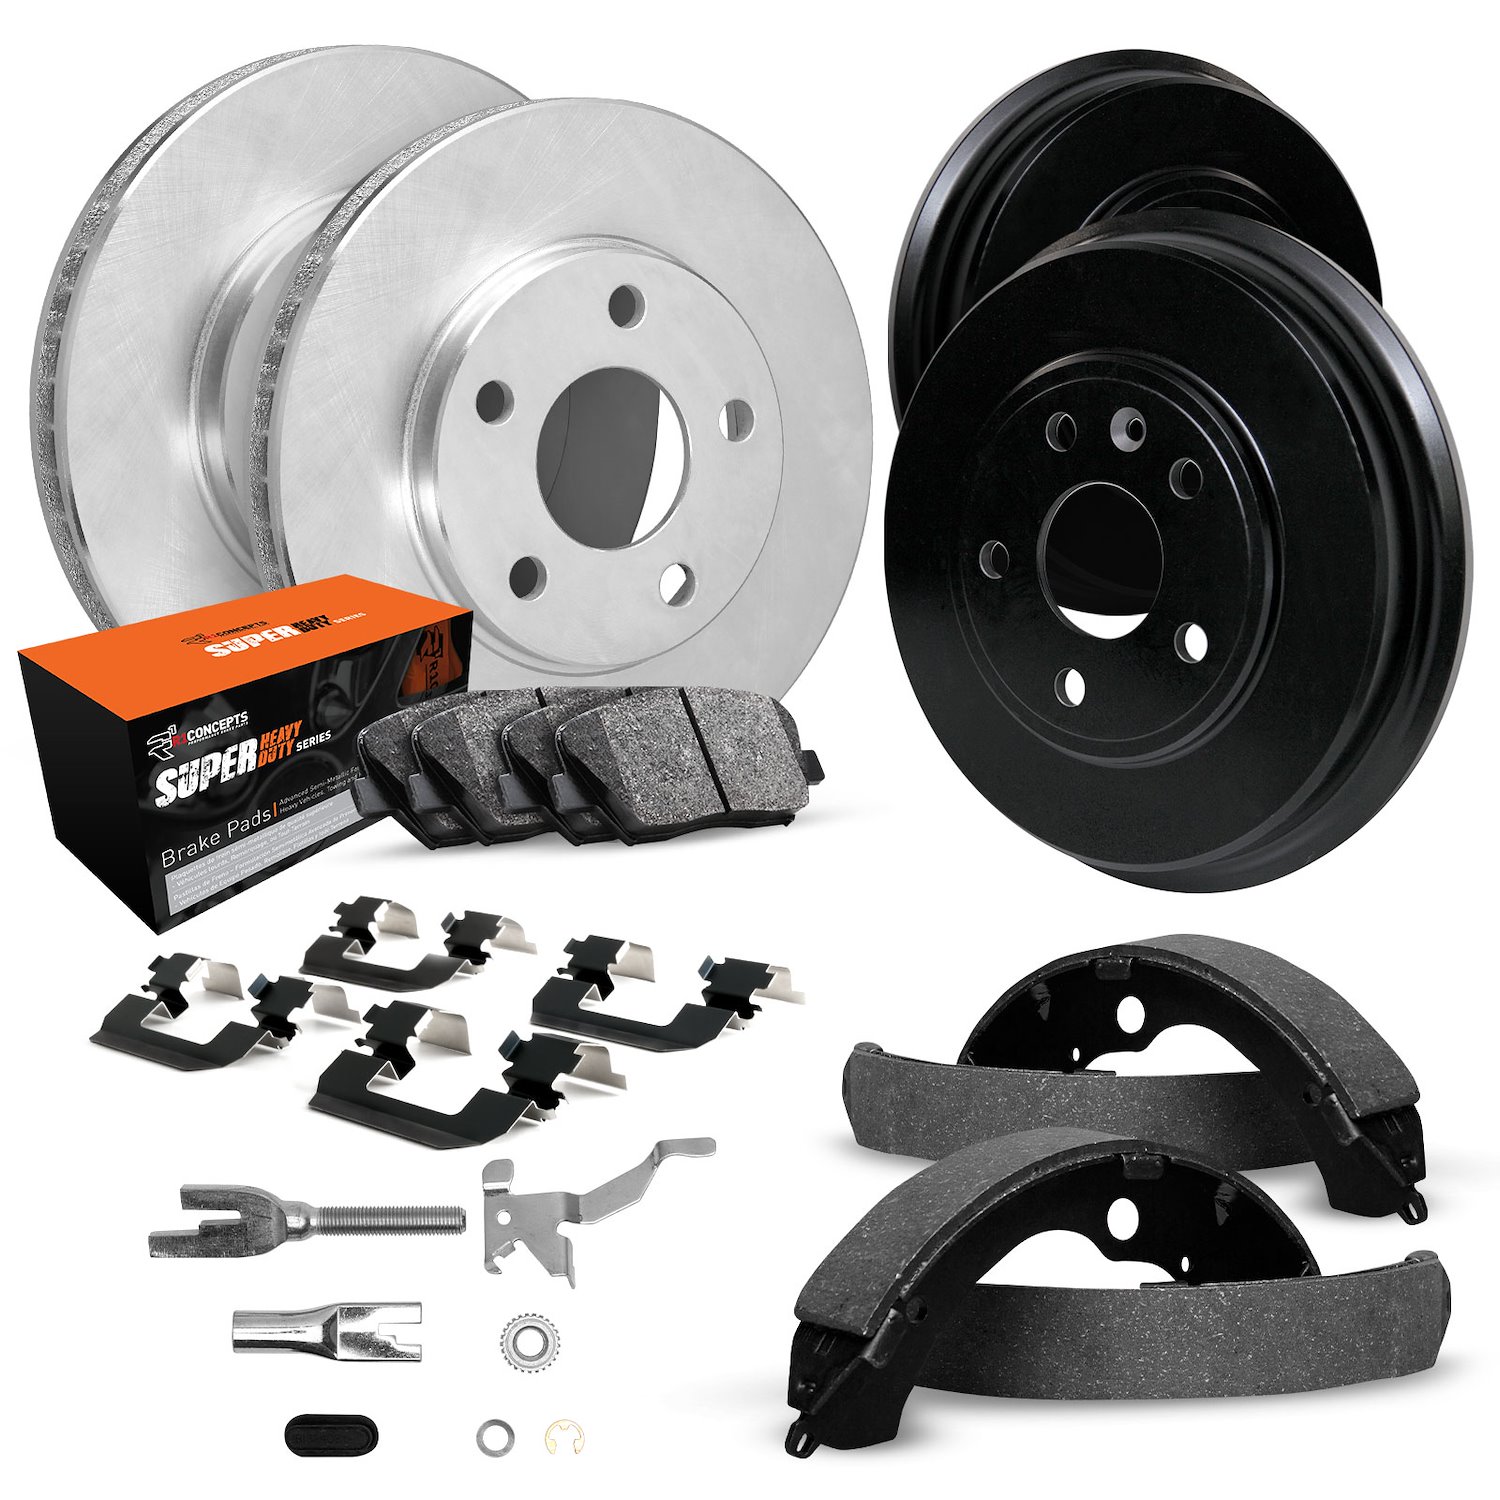 E-Line Blank Brake Rotor & Drum Set w/Super-Duty Pads, Shoes, Hardware, & Adjusters, 1995-1997 Ford/Lincoln/Mercury/Mazda